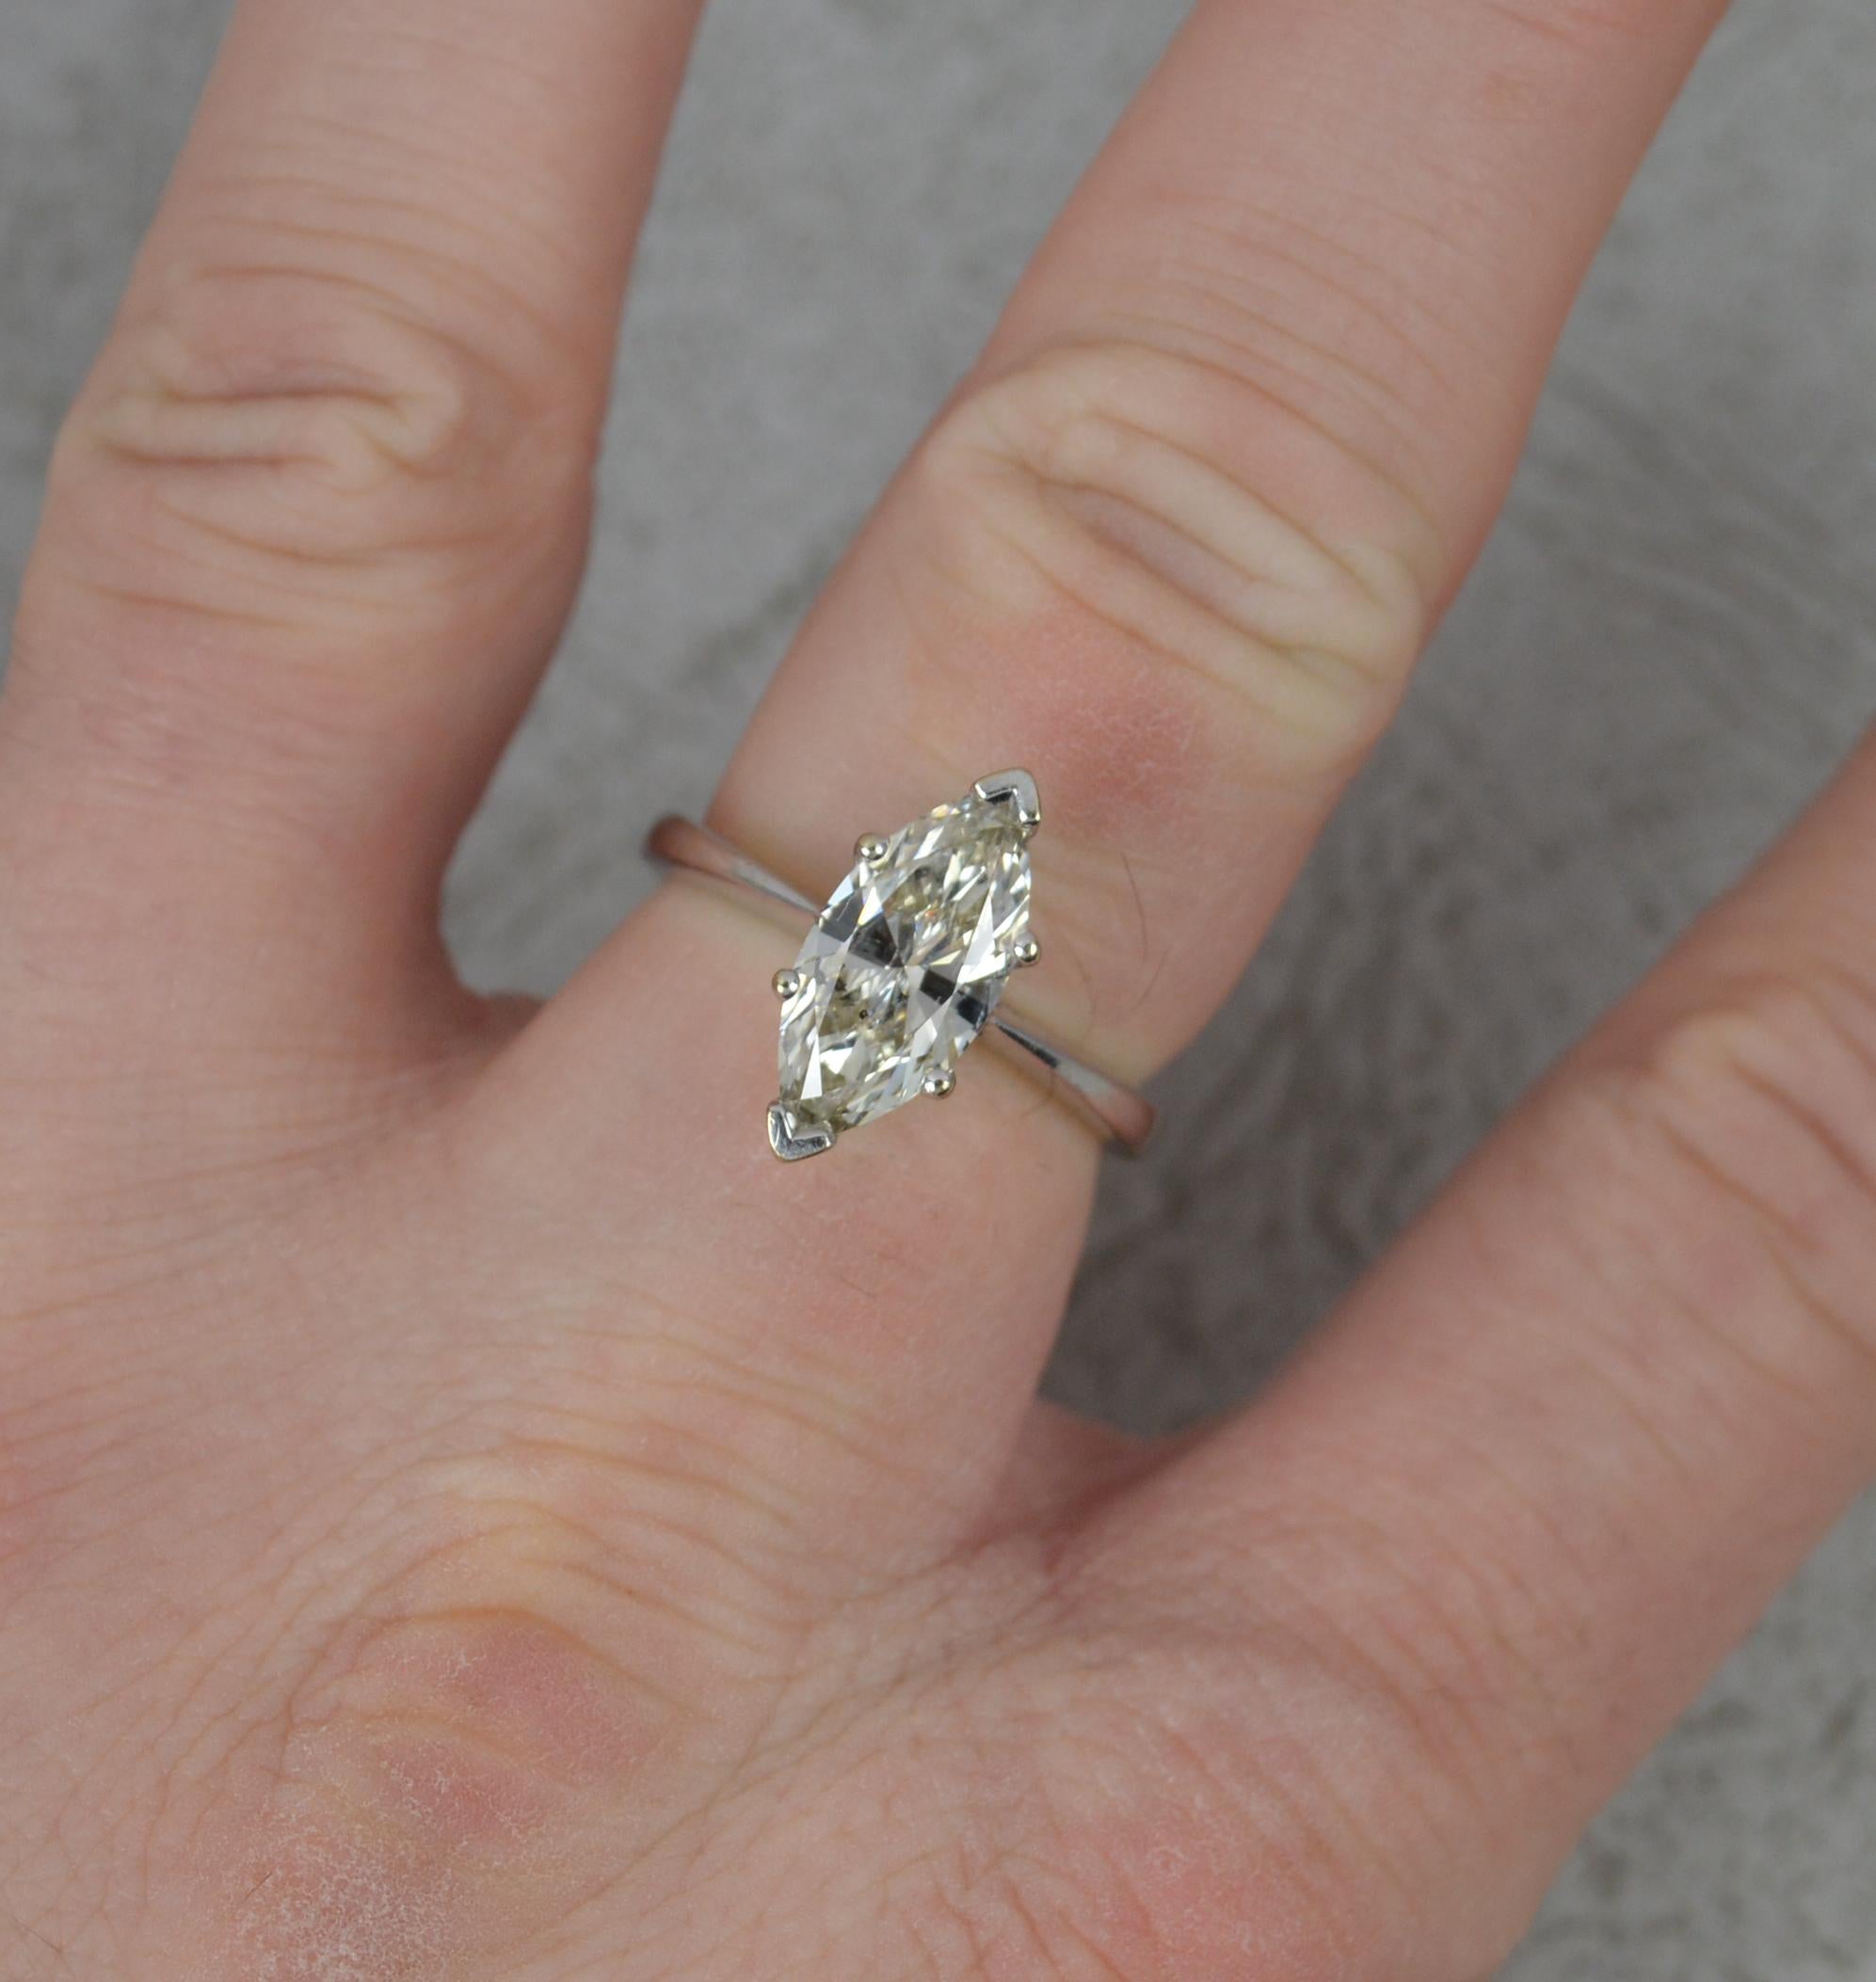 A single, natural diamond engagement ring.
Solid 18 carat white gold example with six claw setting.
Set with a marquise cut diamond complete with Birmingham Anchor Cert. 1.84 carats. 13mm x 6.3mm. i1 clarity, k colour. Overall a couple of black